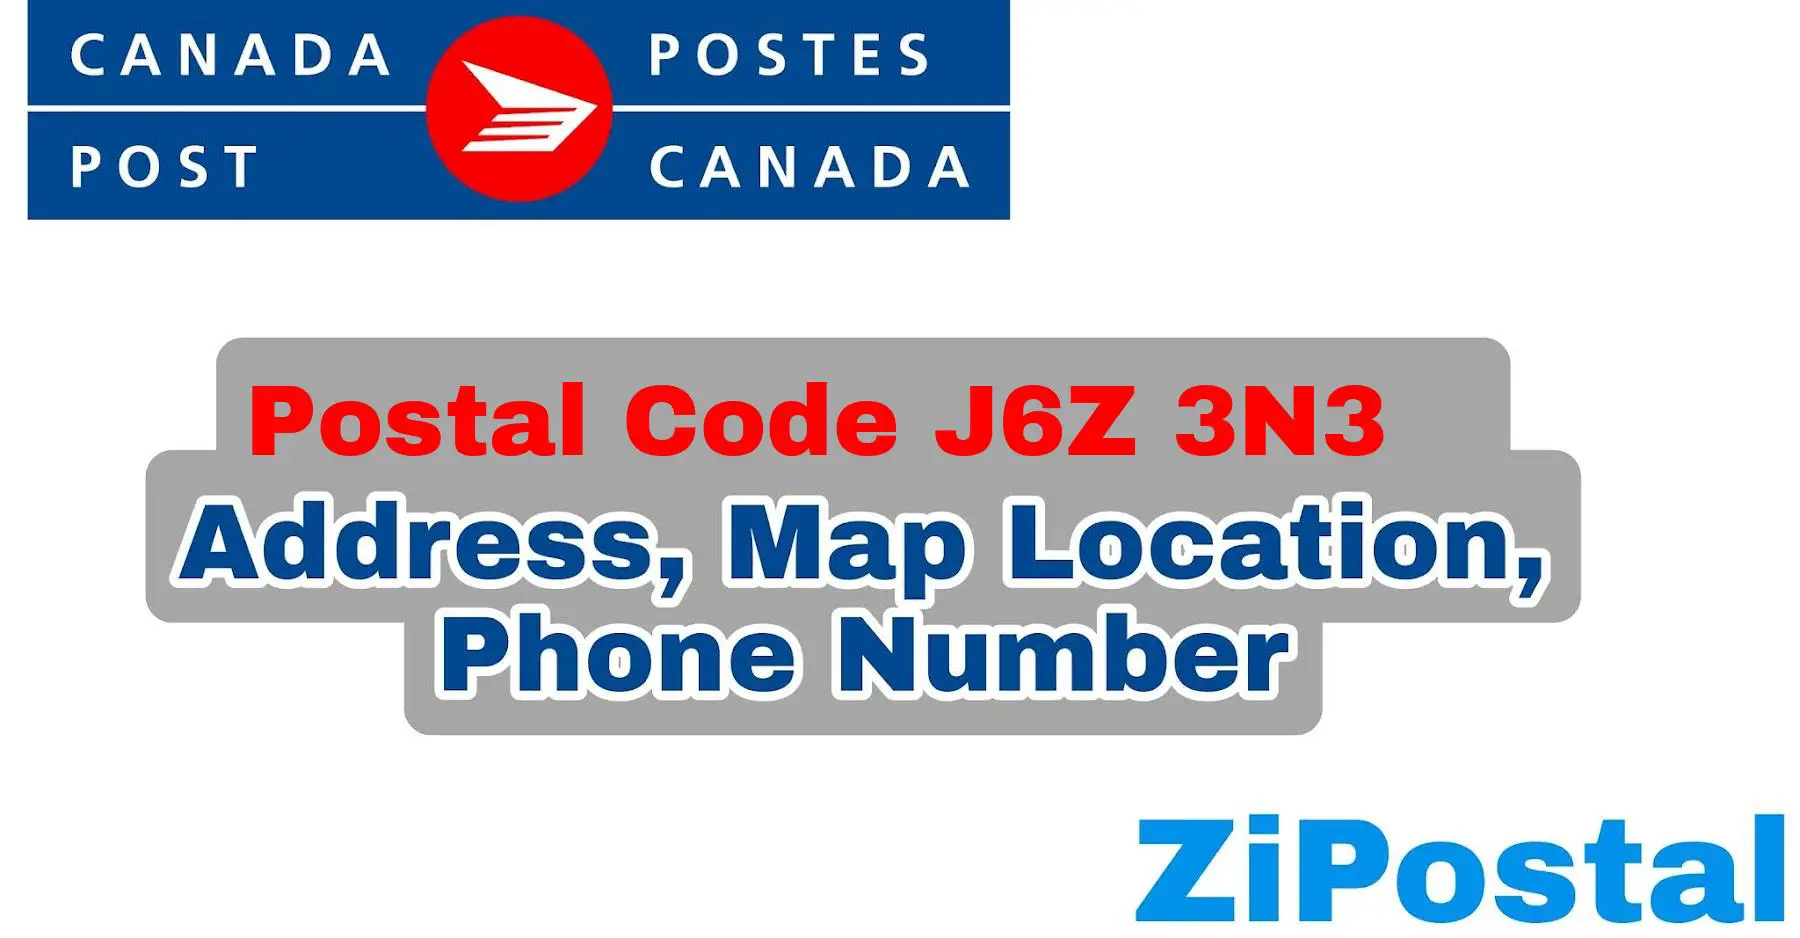 Postal Code J6Z 3N3 Address Map Location and Phone Number